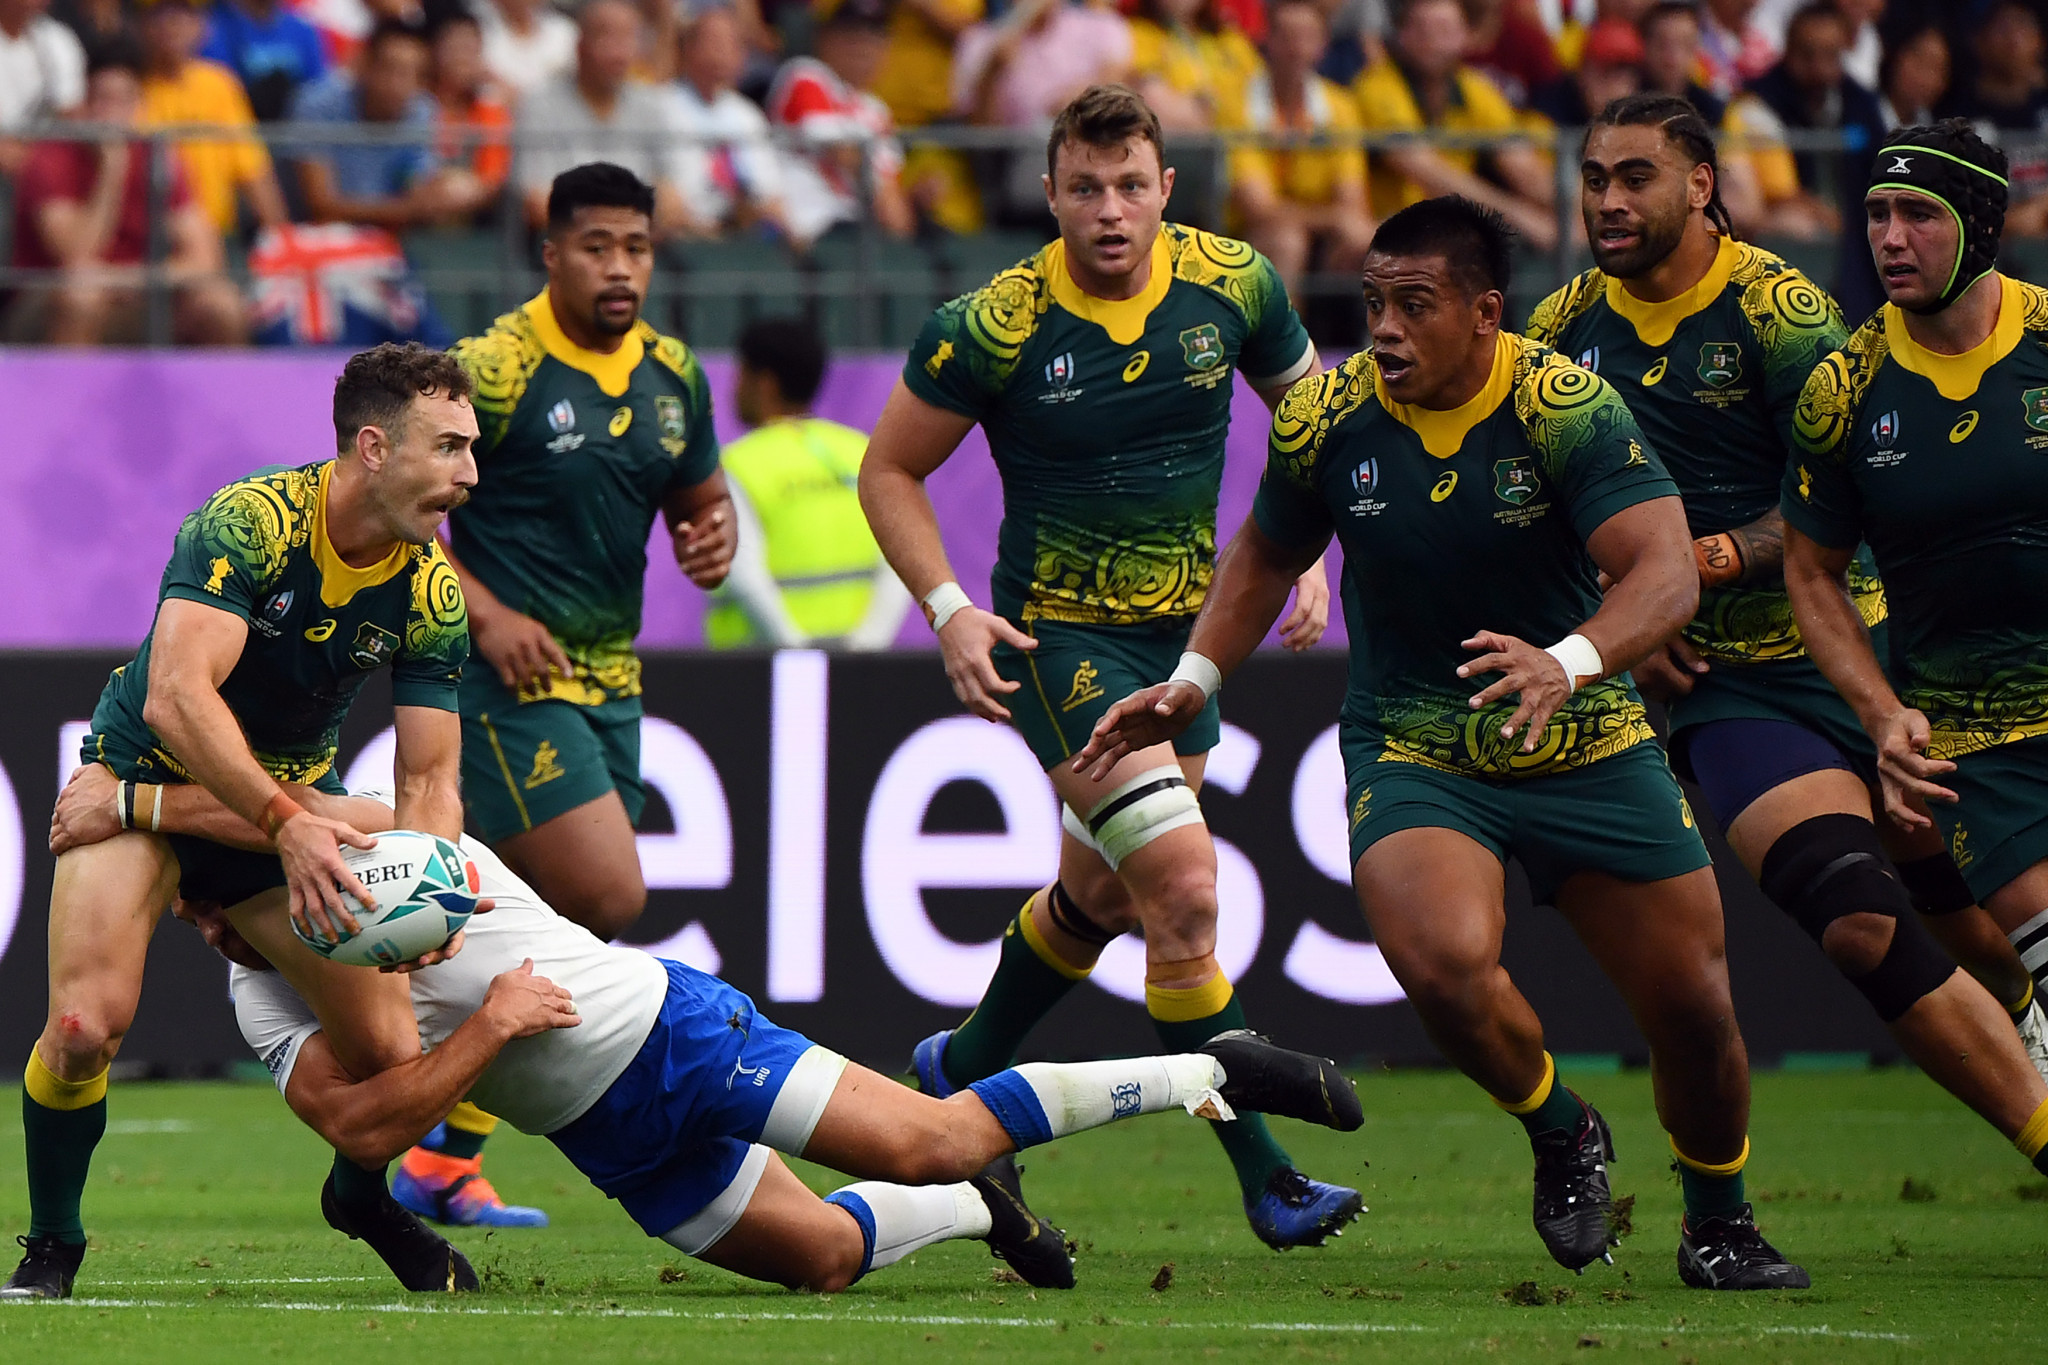 Australia got their attacking mojo back against Uruguay ©Getty Images